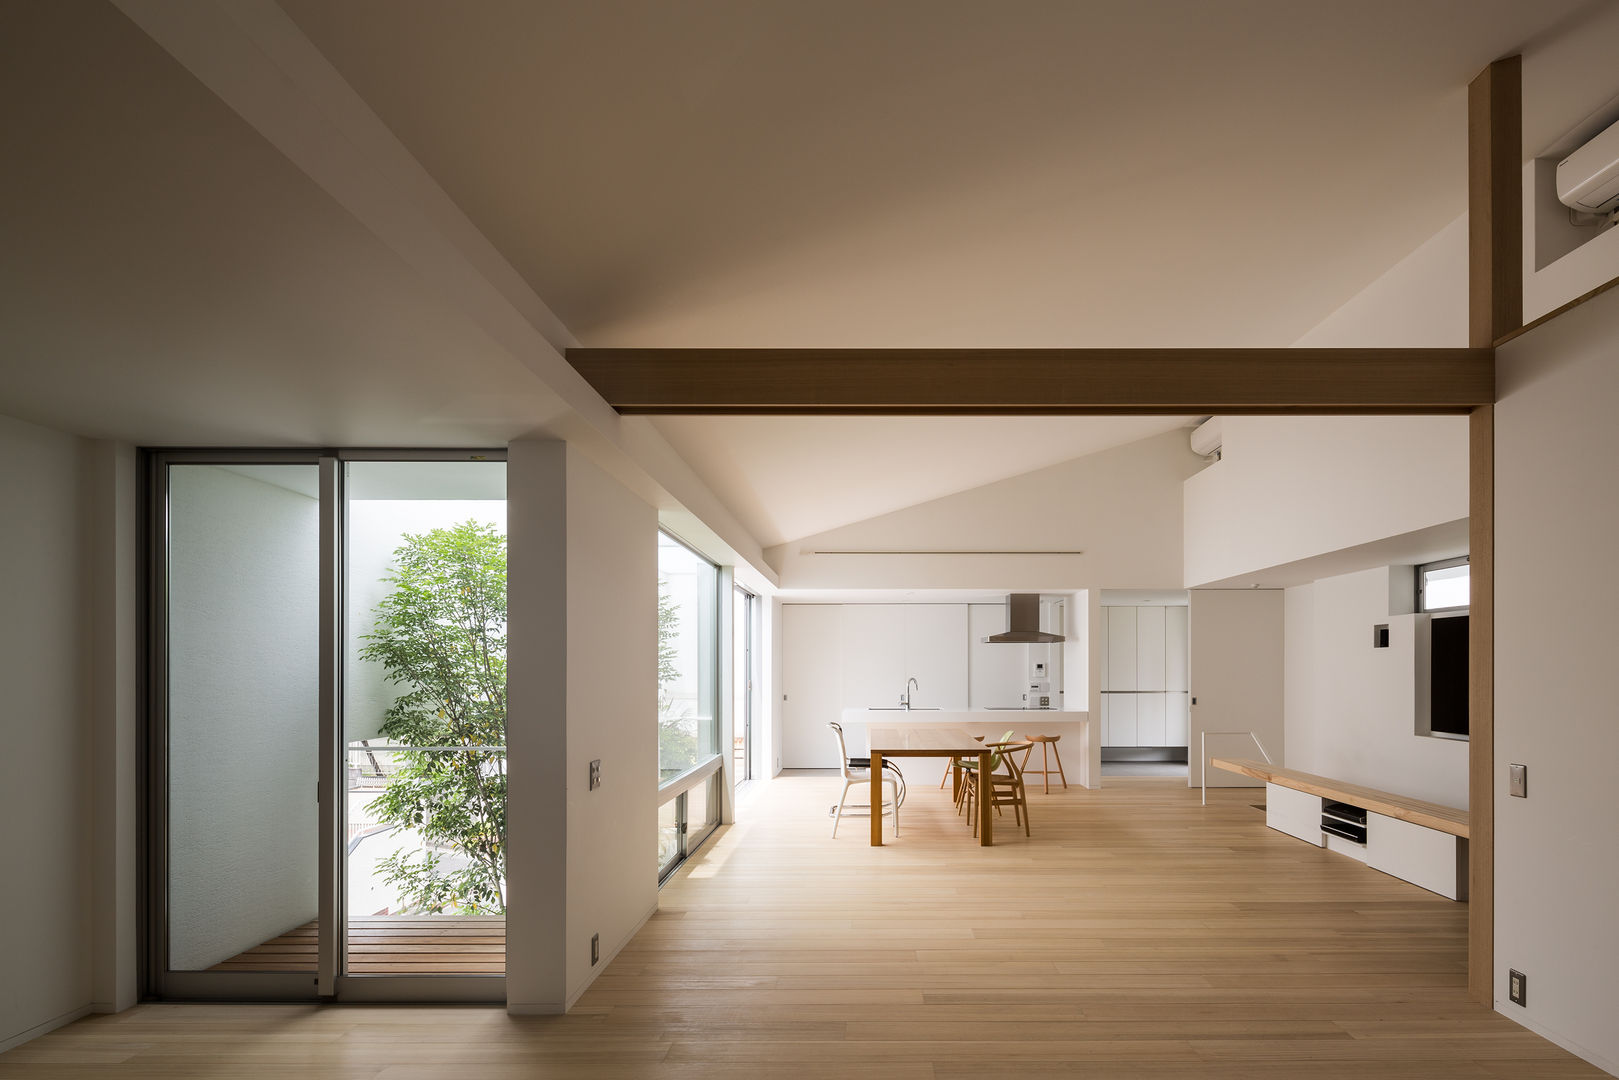 The House supplies a monotonous street with a passing view, Kenji Yanagawa Architect and Associates Kenji Yanagawa Architect and Associates Livings de estilo moderno